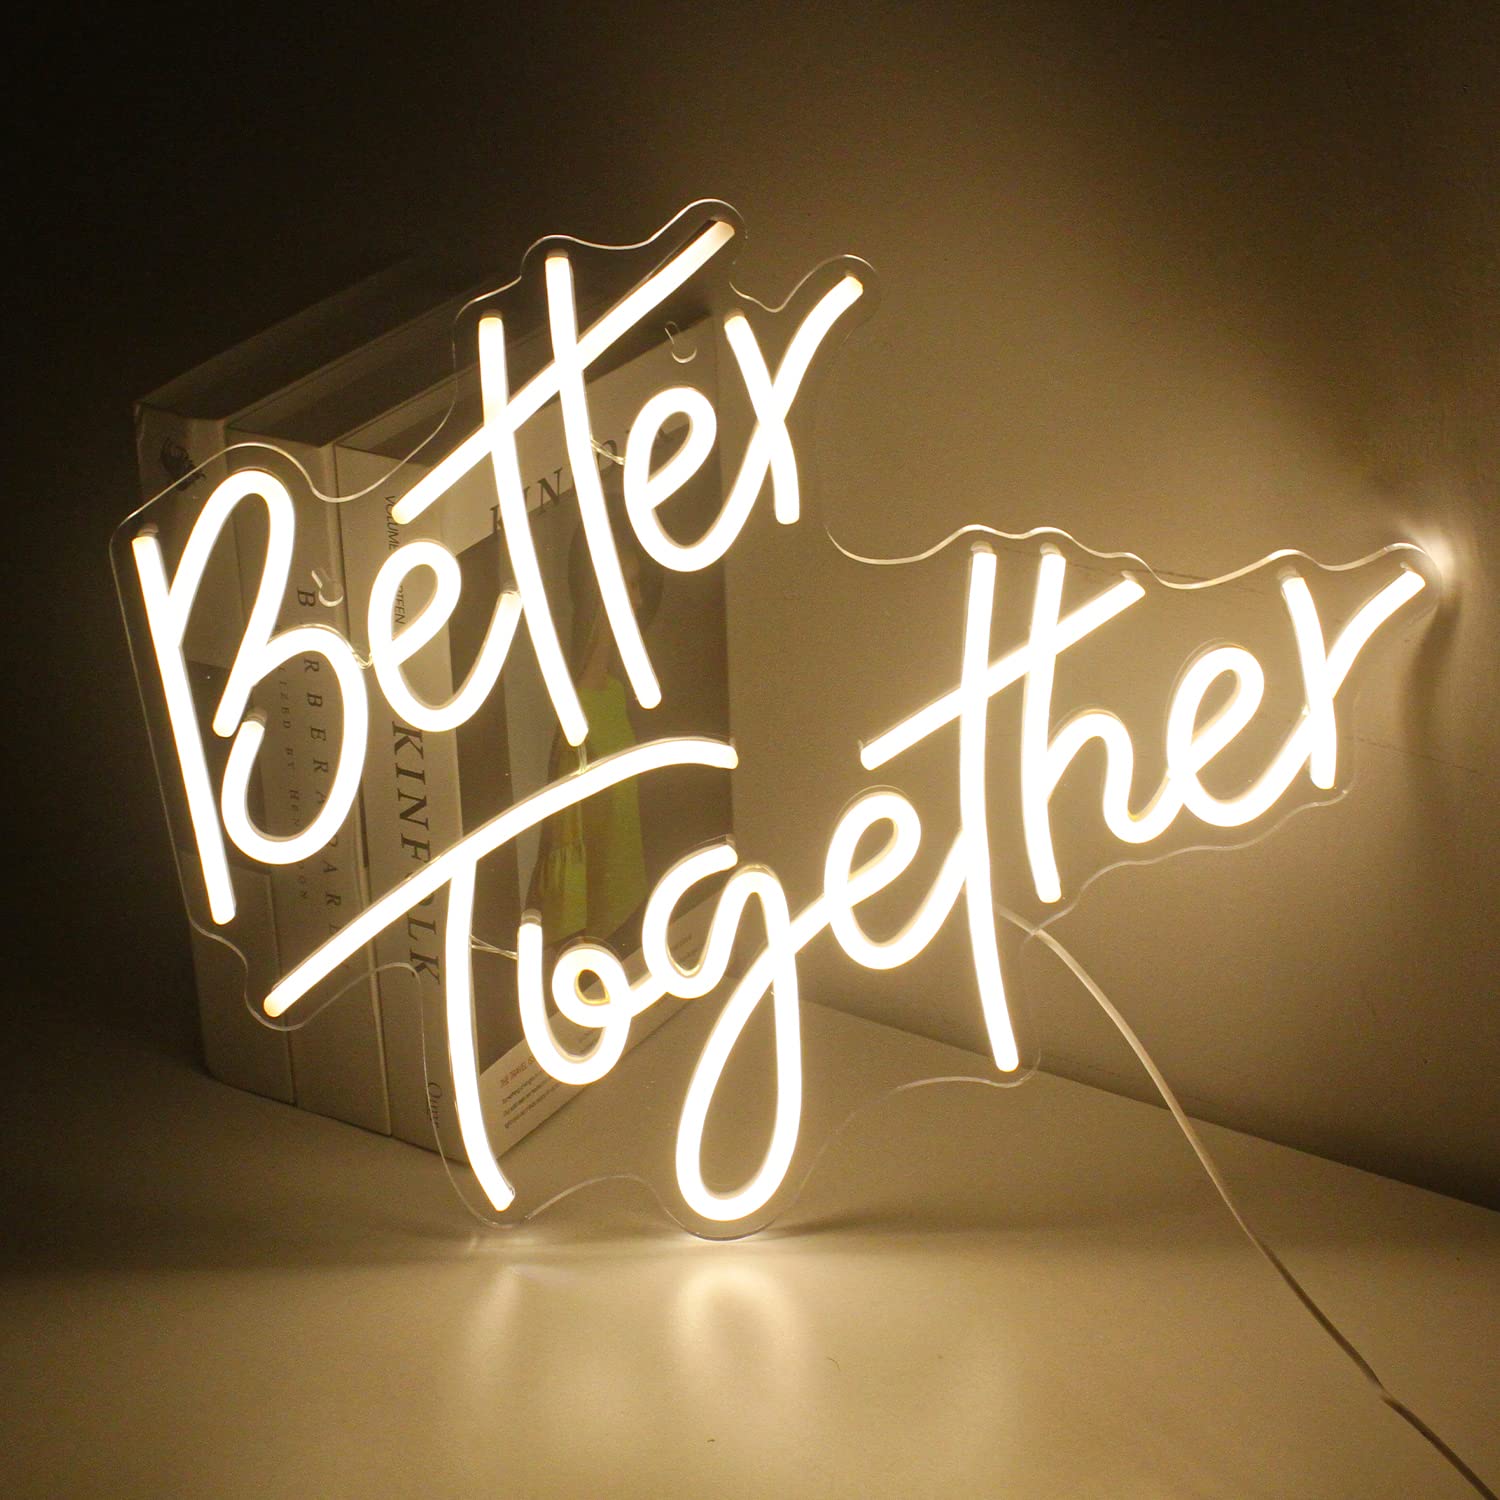 Looklight Better Together Words Neon Signs Warm White Led Neon Light Letters Decorative Led Signs Powered by USB for Wedding Party Club Anniversary Bar Birthday Decor